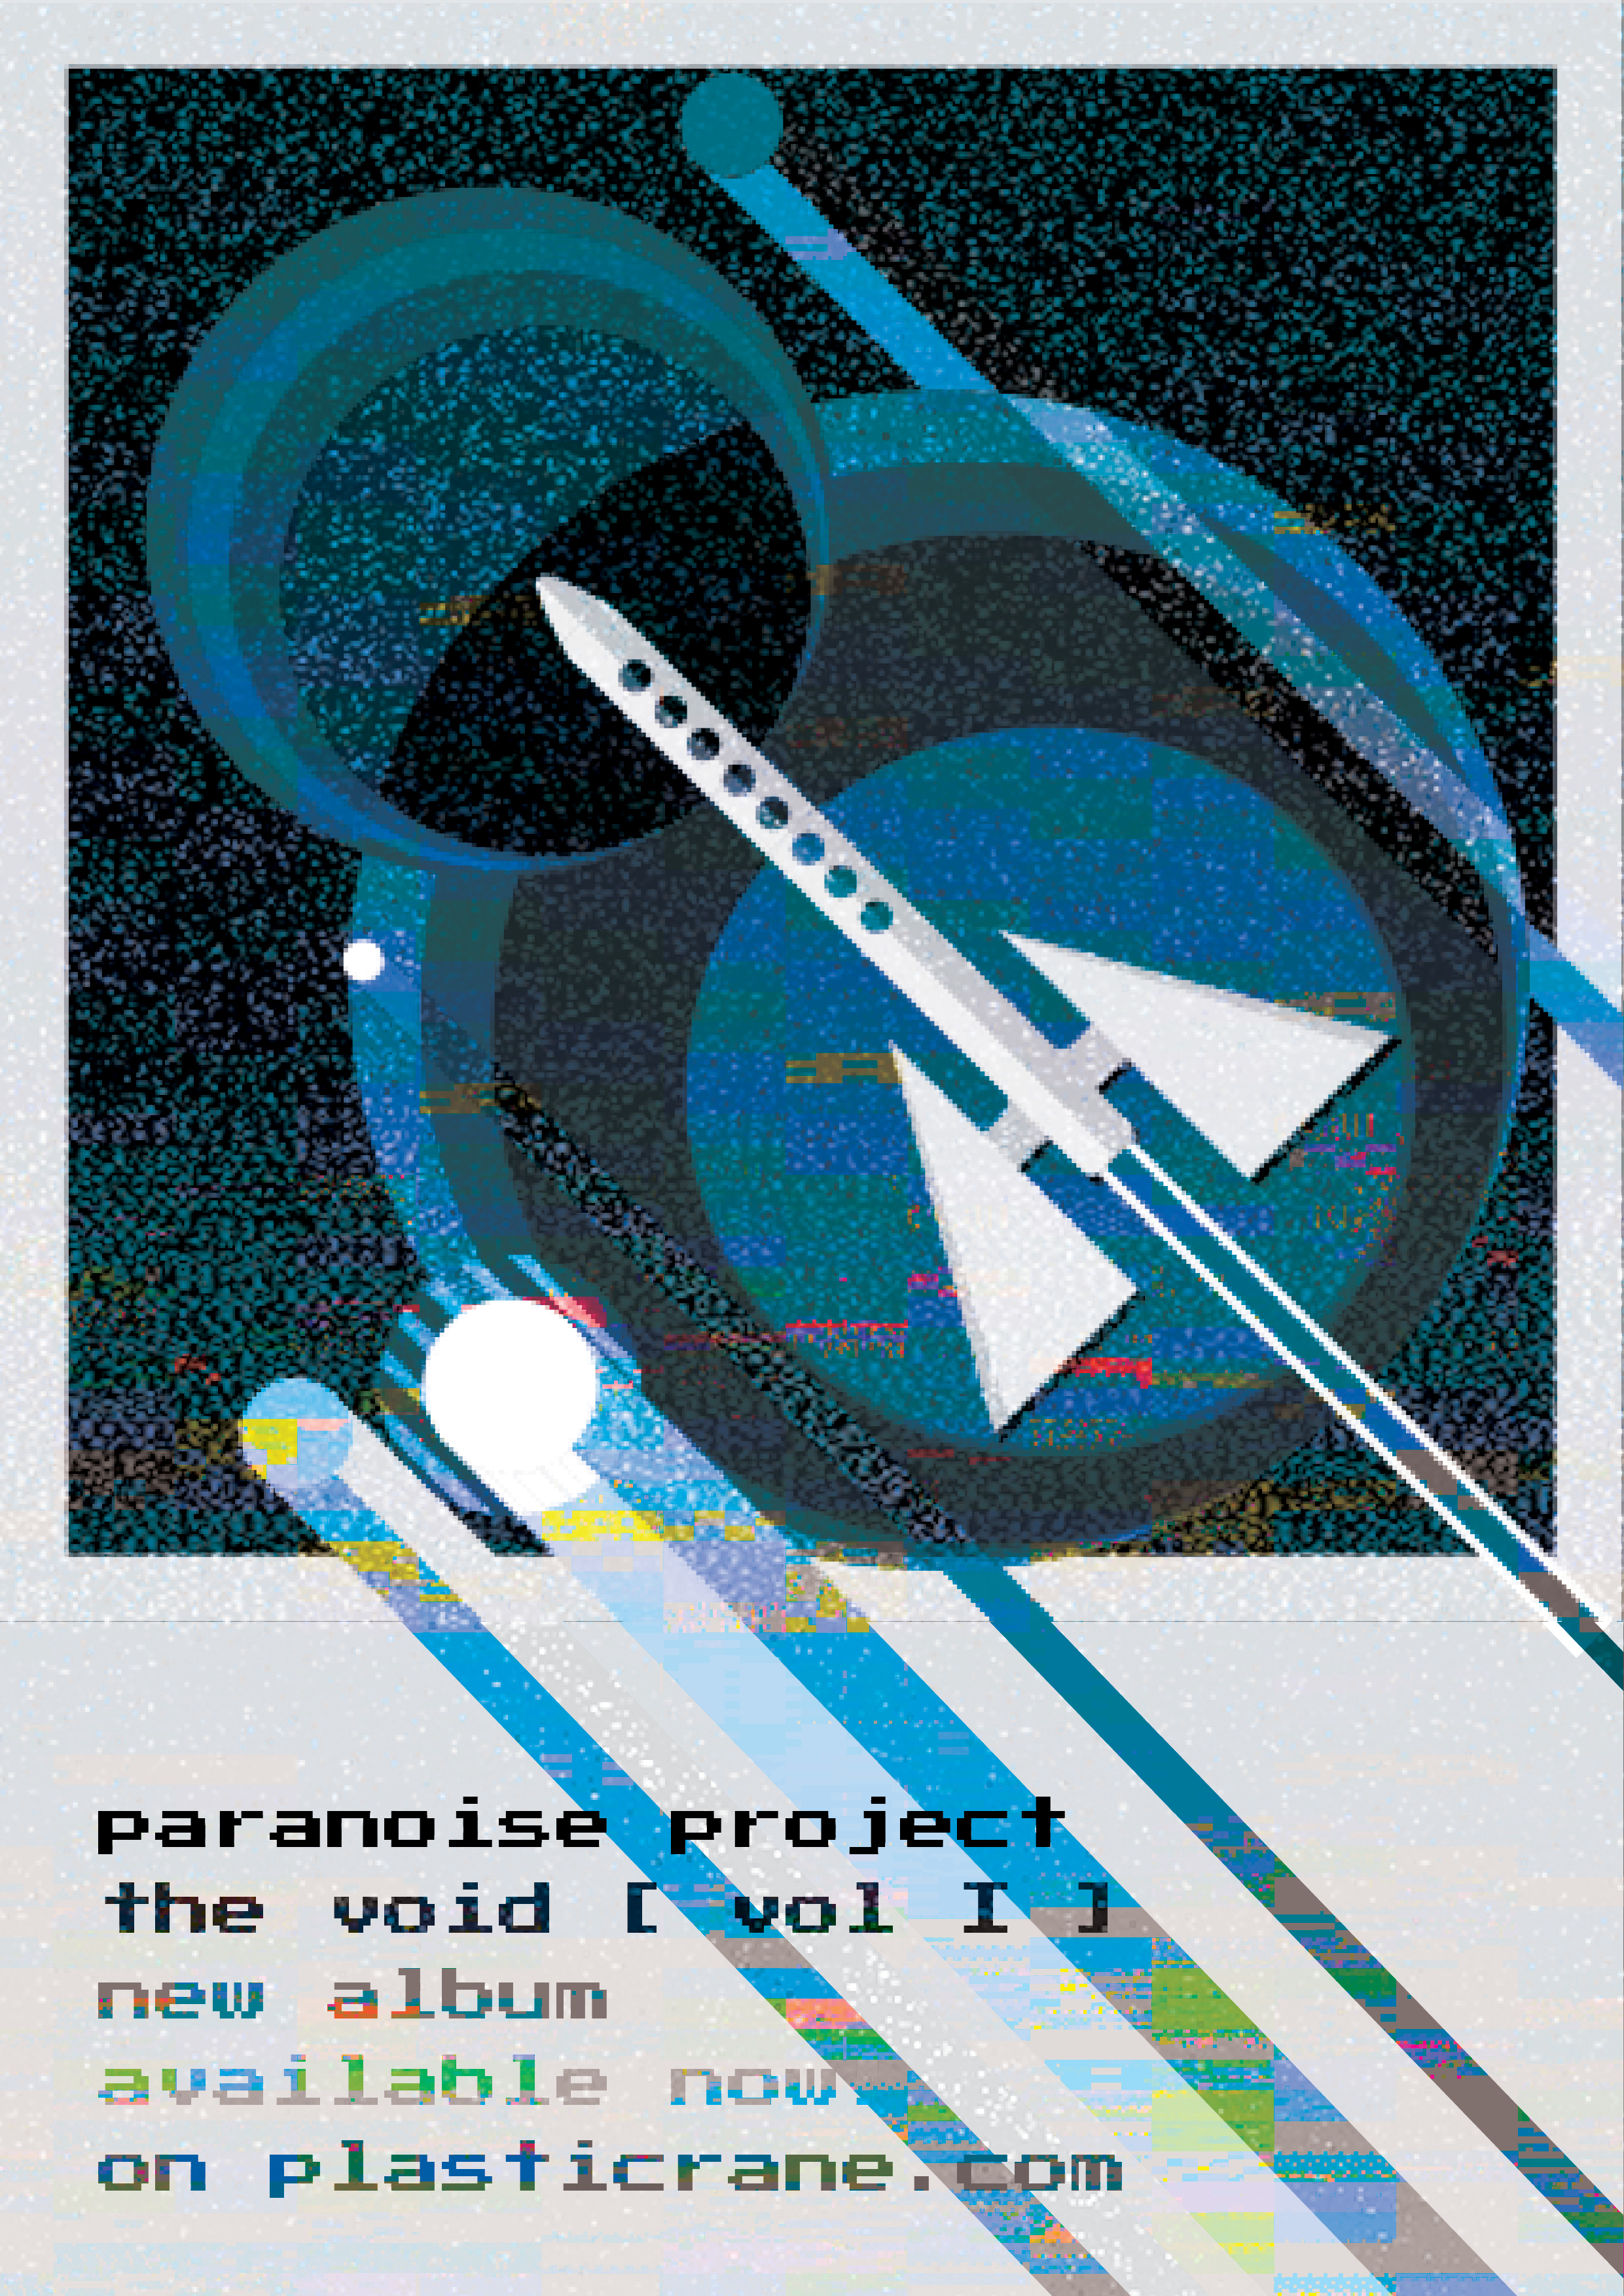 Paranoise Project. The Void Vol.1. Poster. 2021